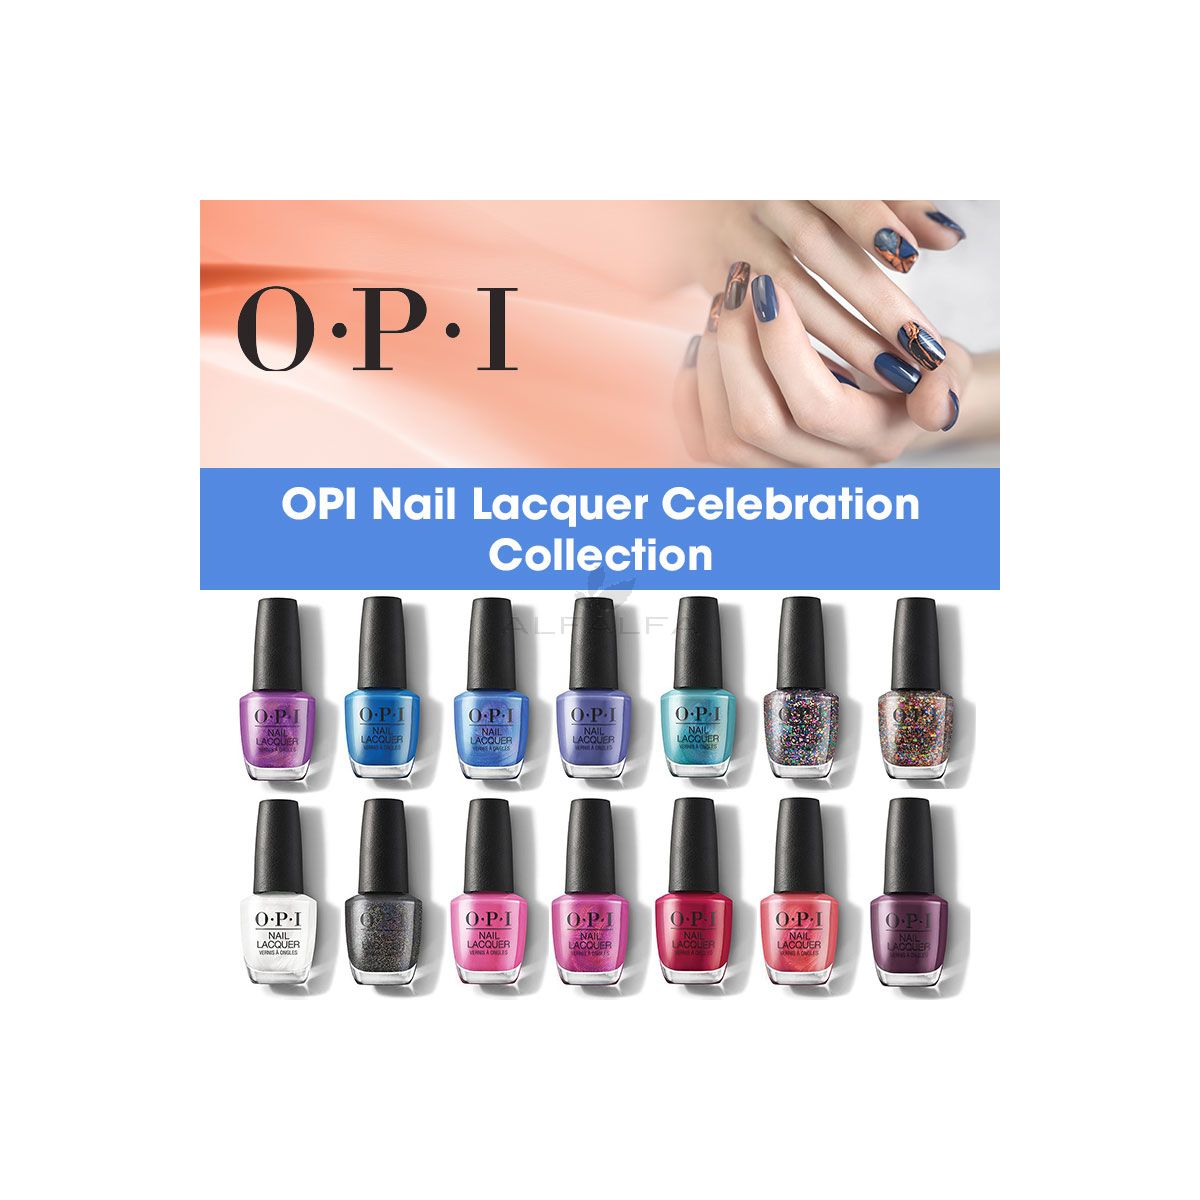 OPI Nail Lacquer Celebration Collection